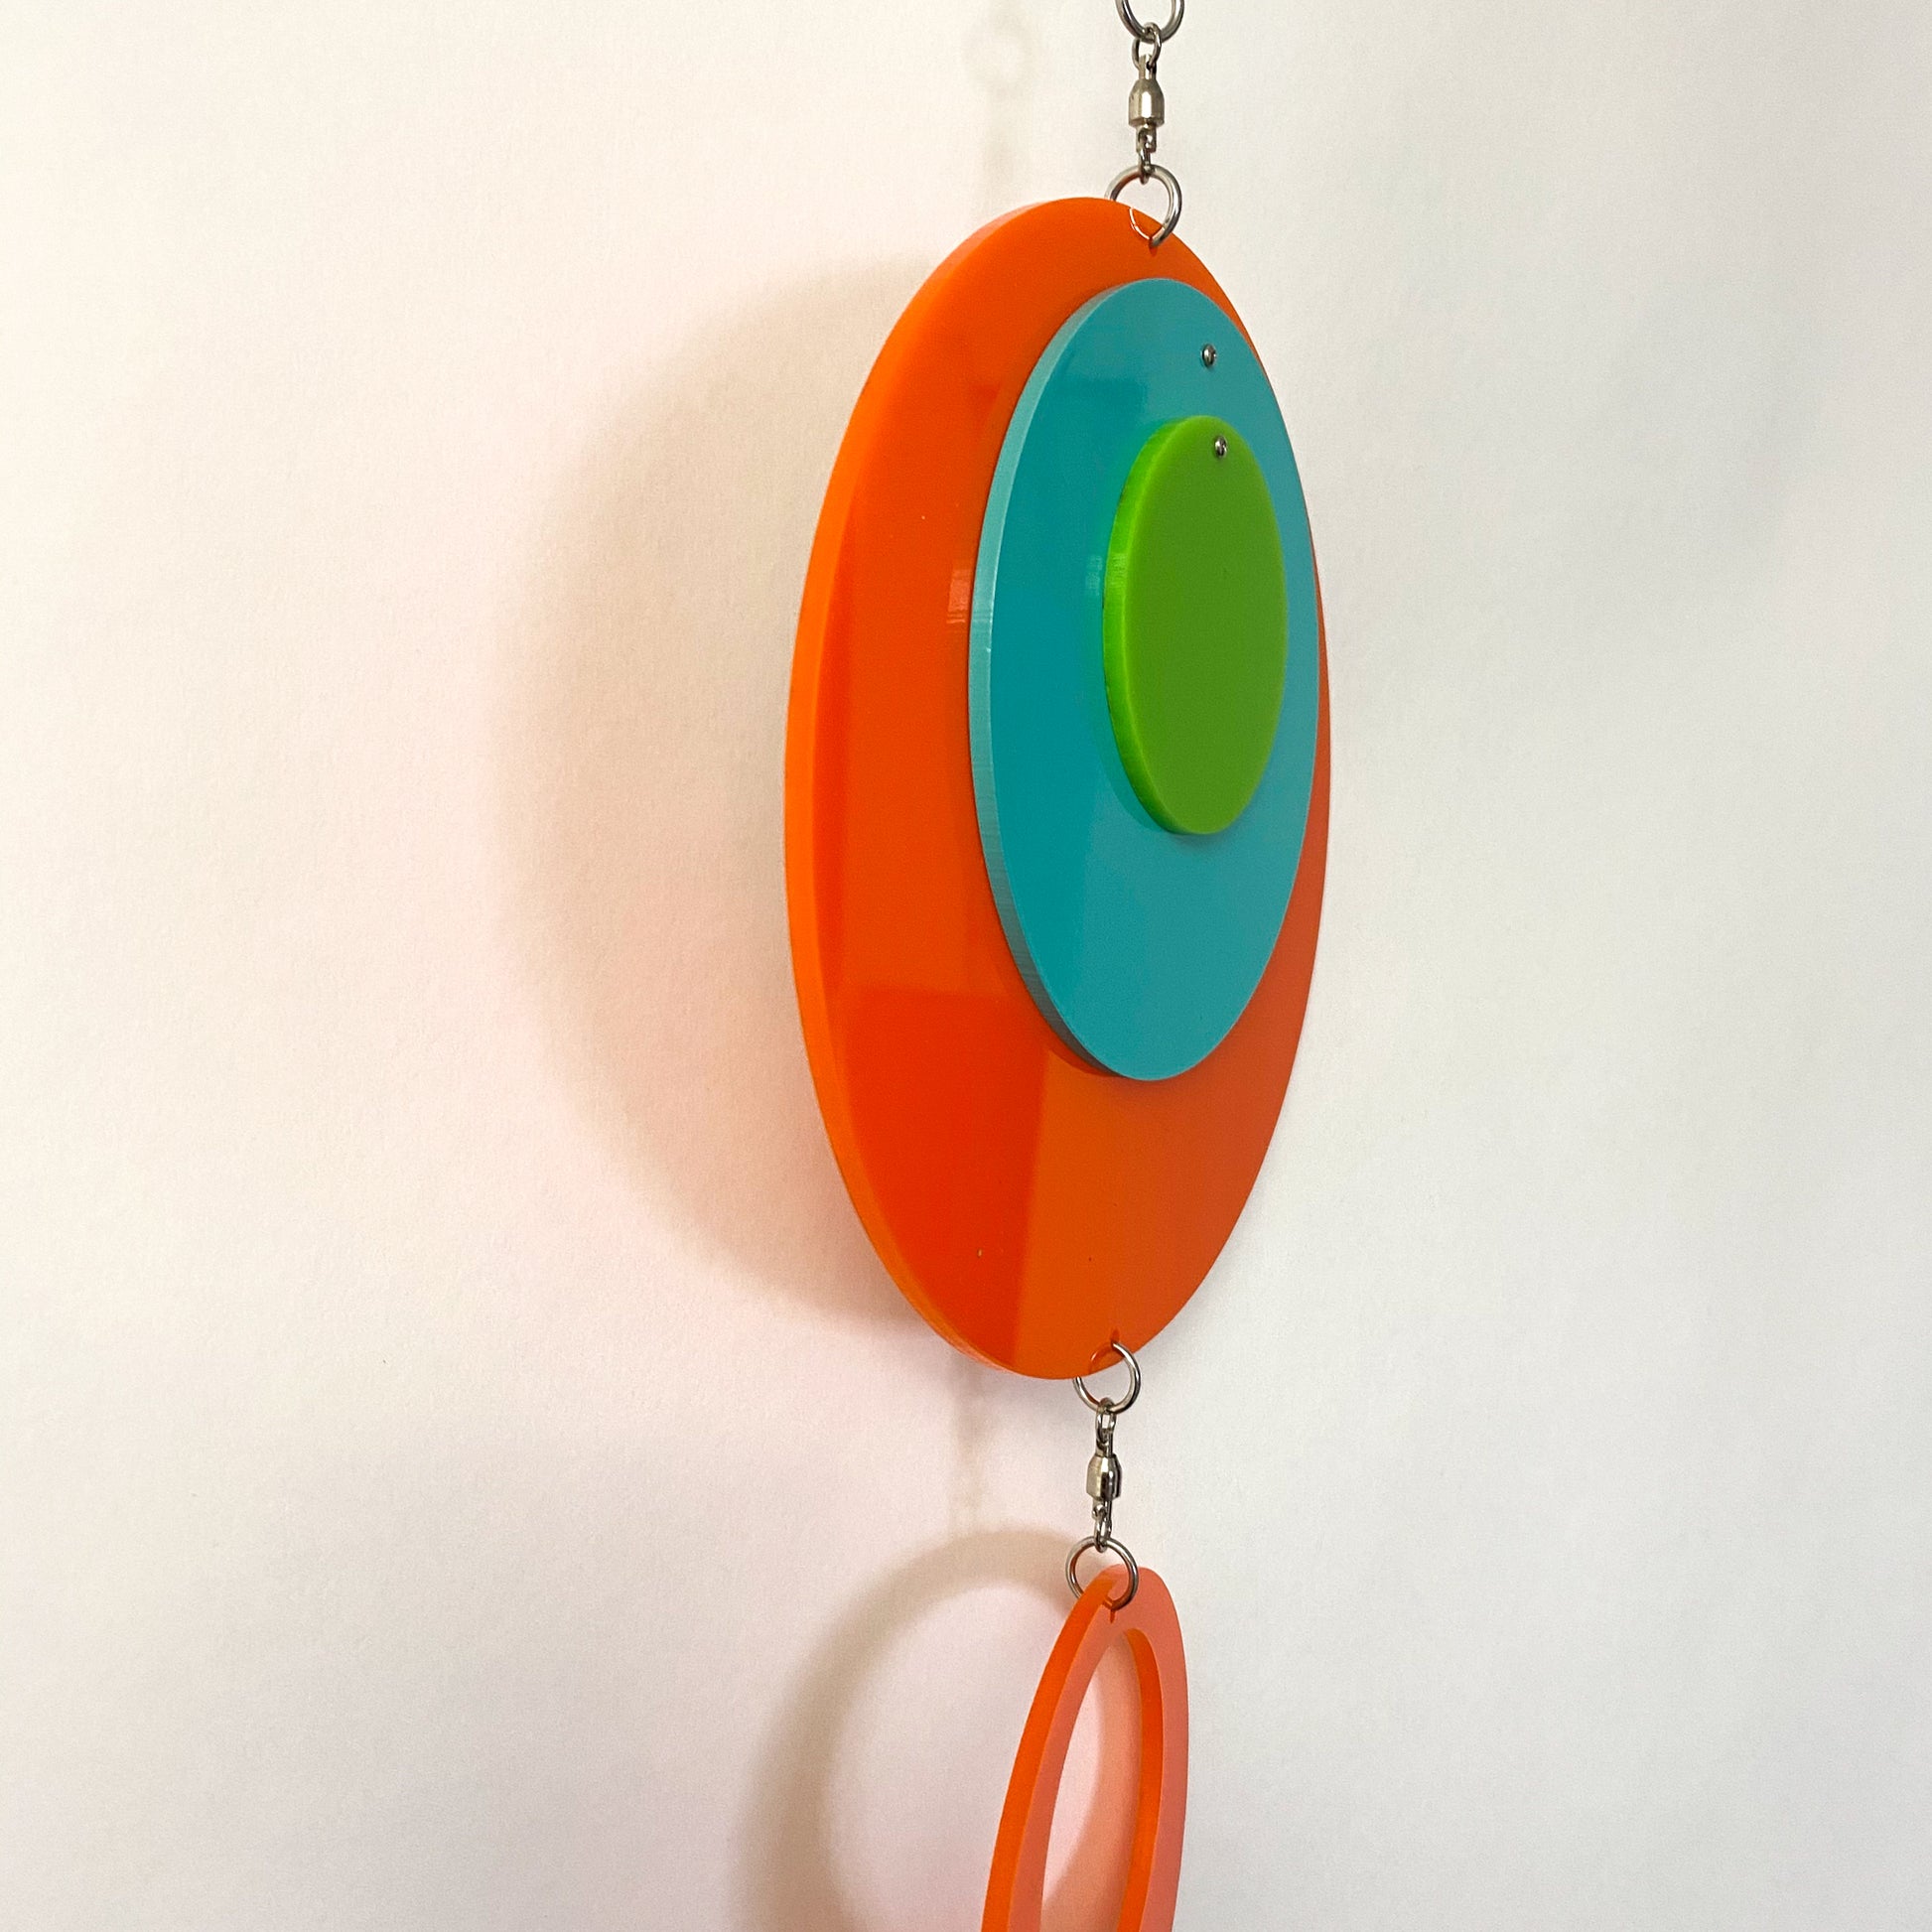 Side of Palm Springs Retro Vertical Hanging Mobile in Palm Springs Colors of Orange, Aqua, and Lime by AtomicMobiles.com